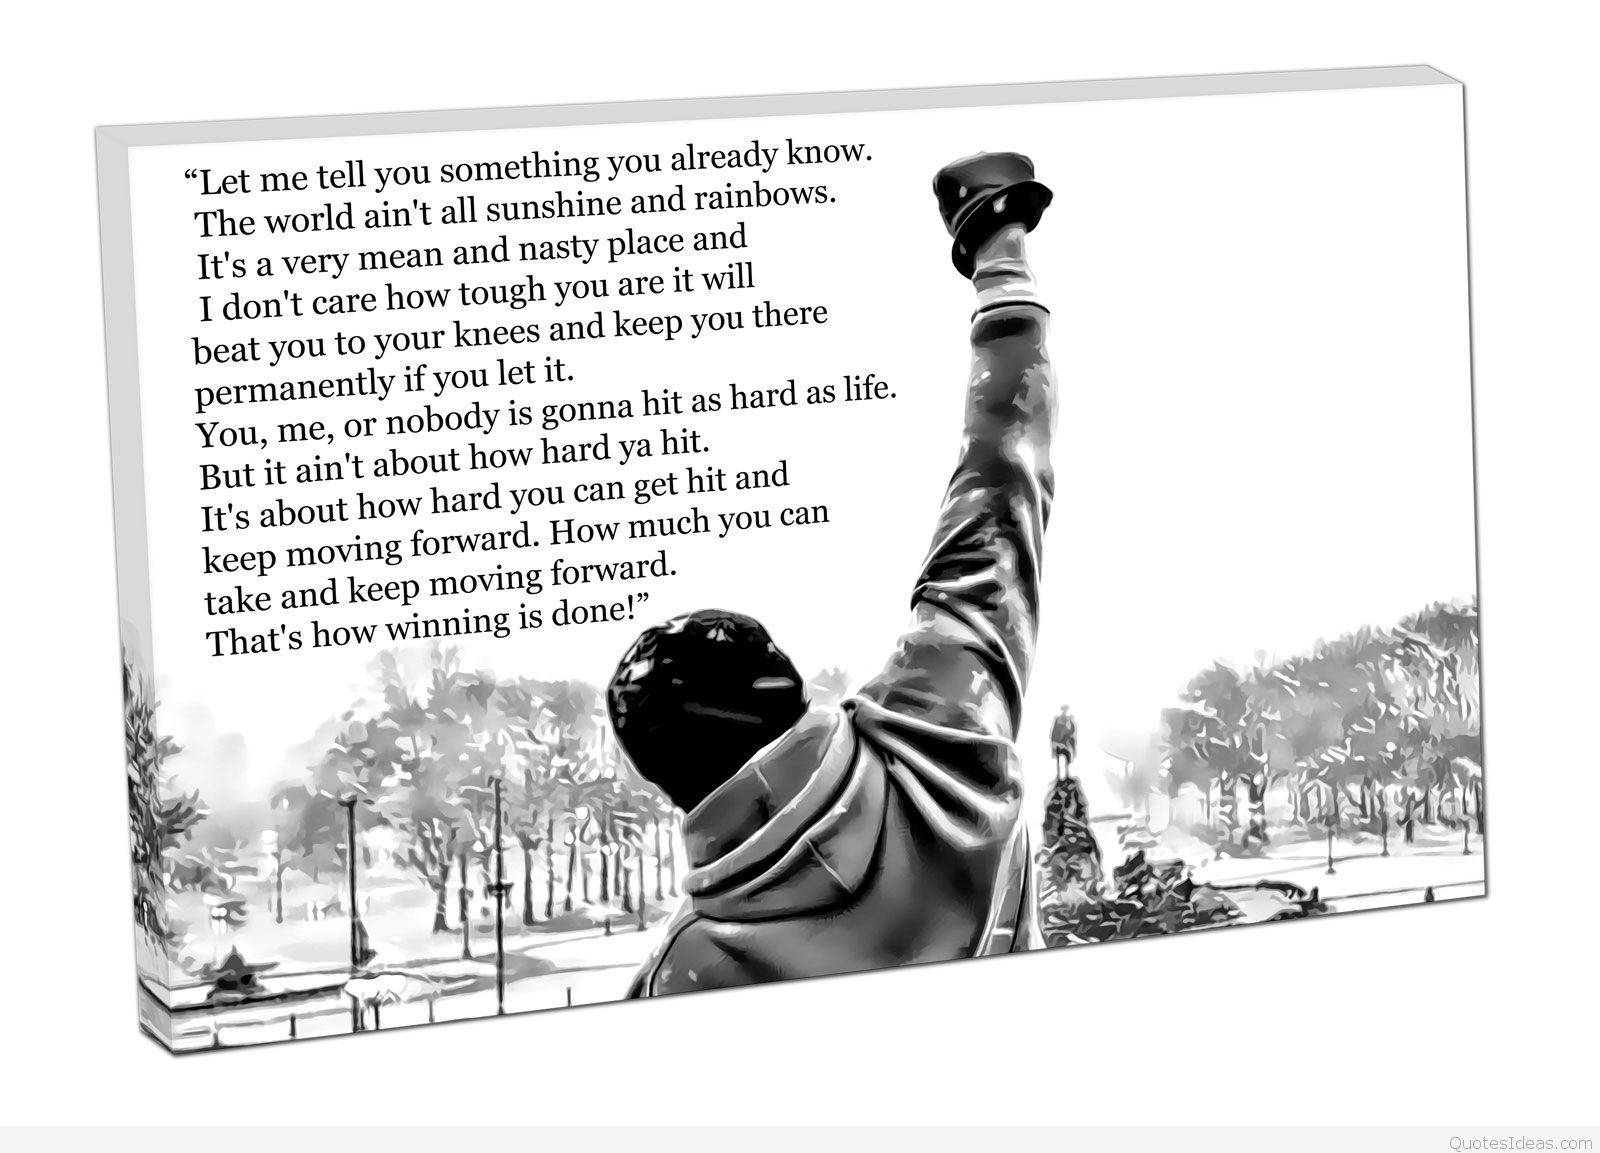 SYlvester Stallone Rocky Balboa Quotes Wallpapers hd